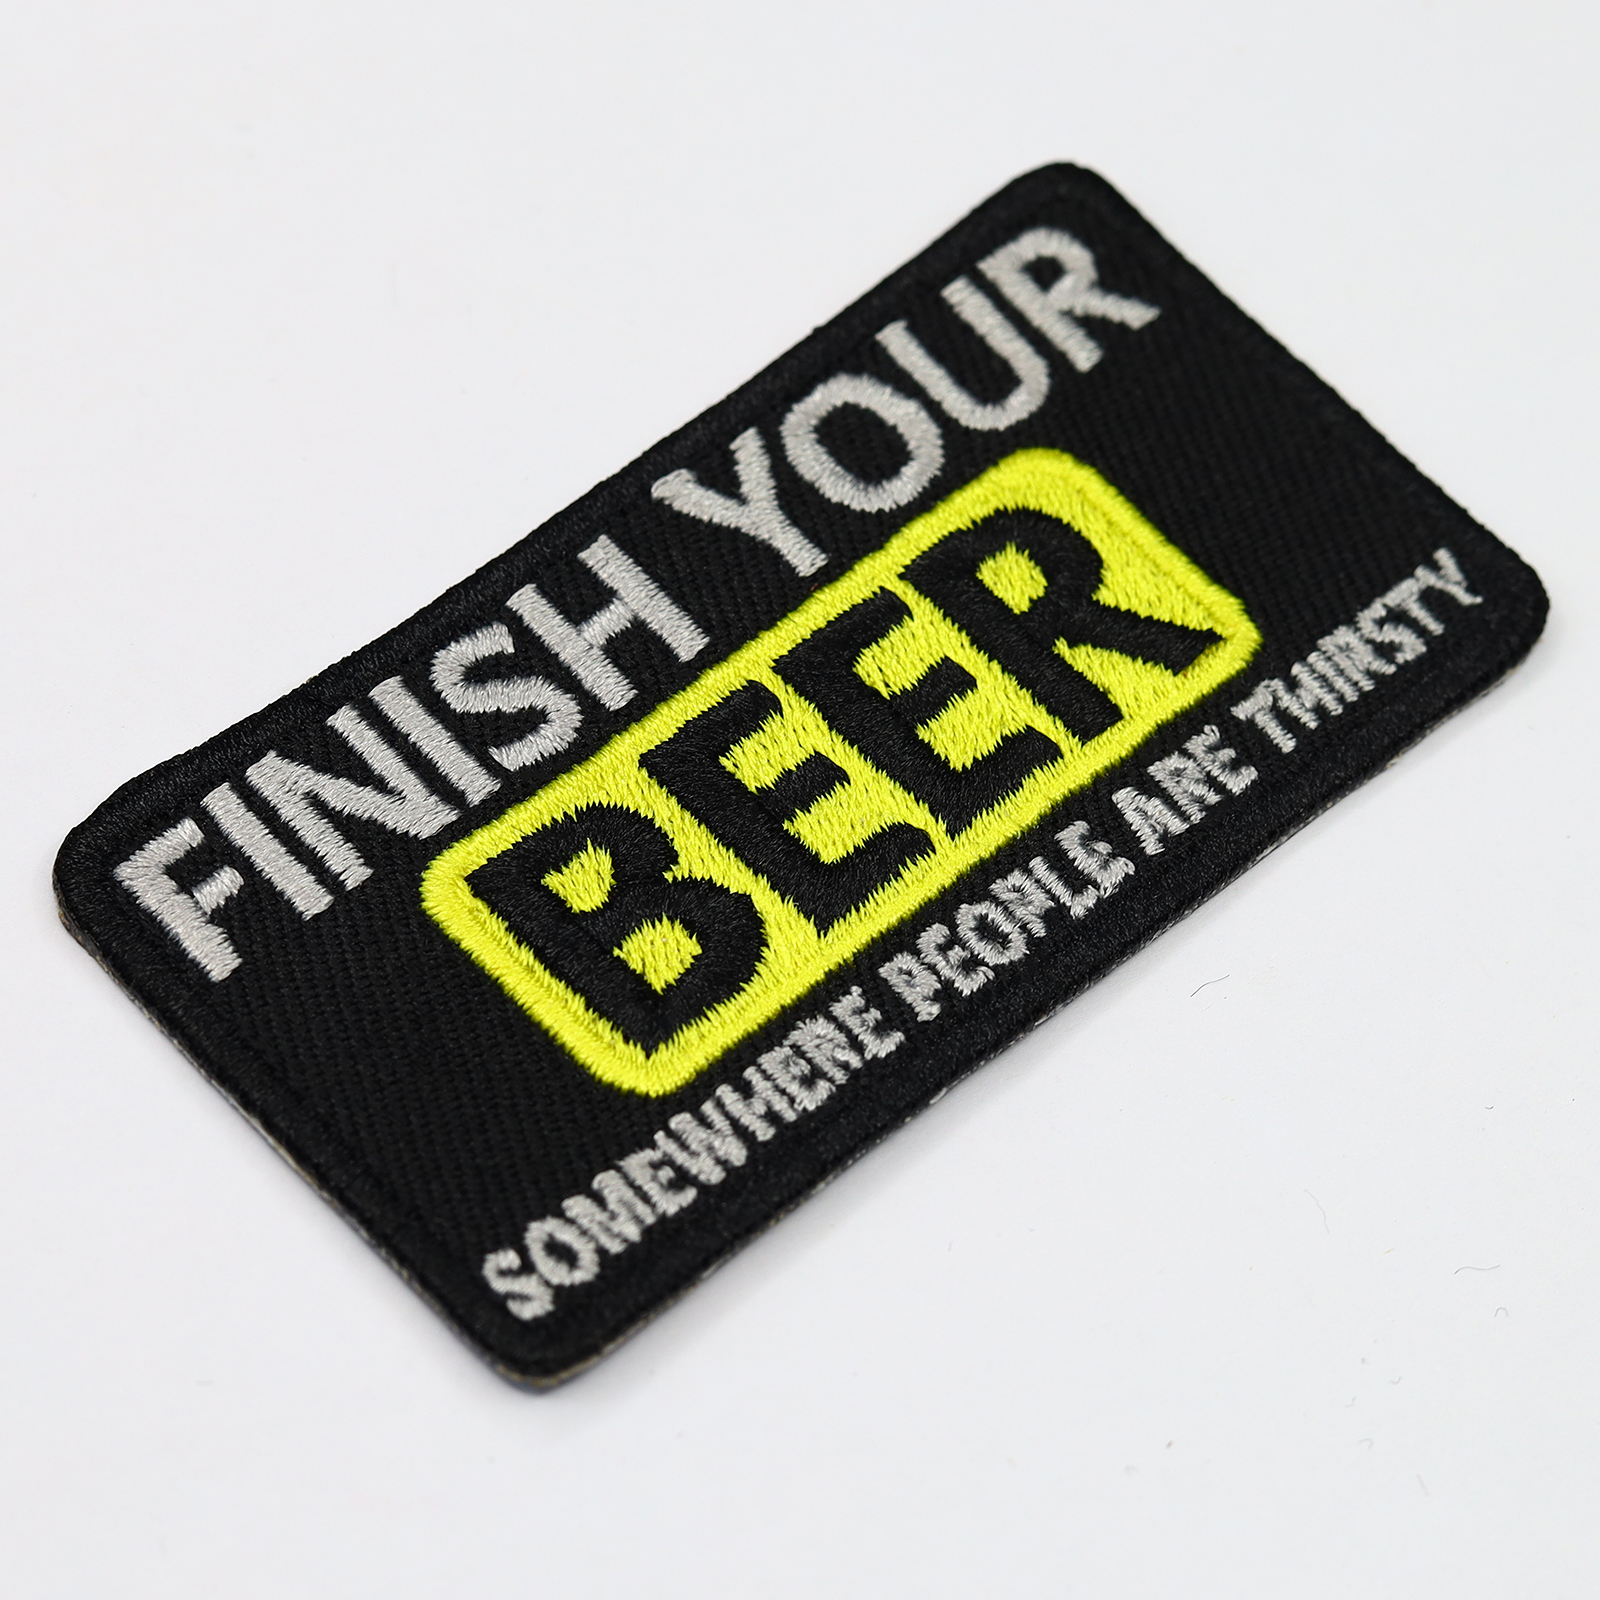 Finish your beer... somewhere people are thirsty - Patch